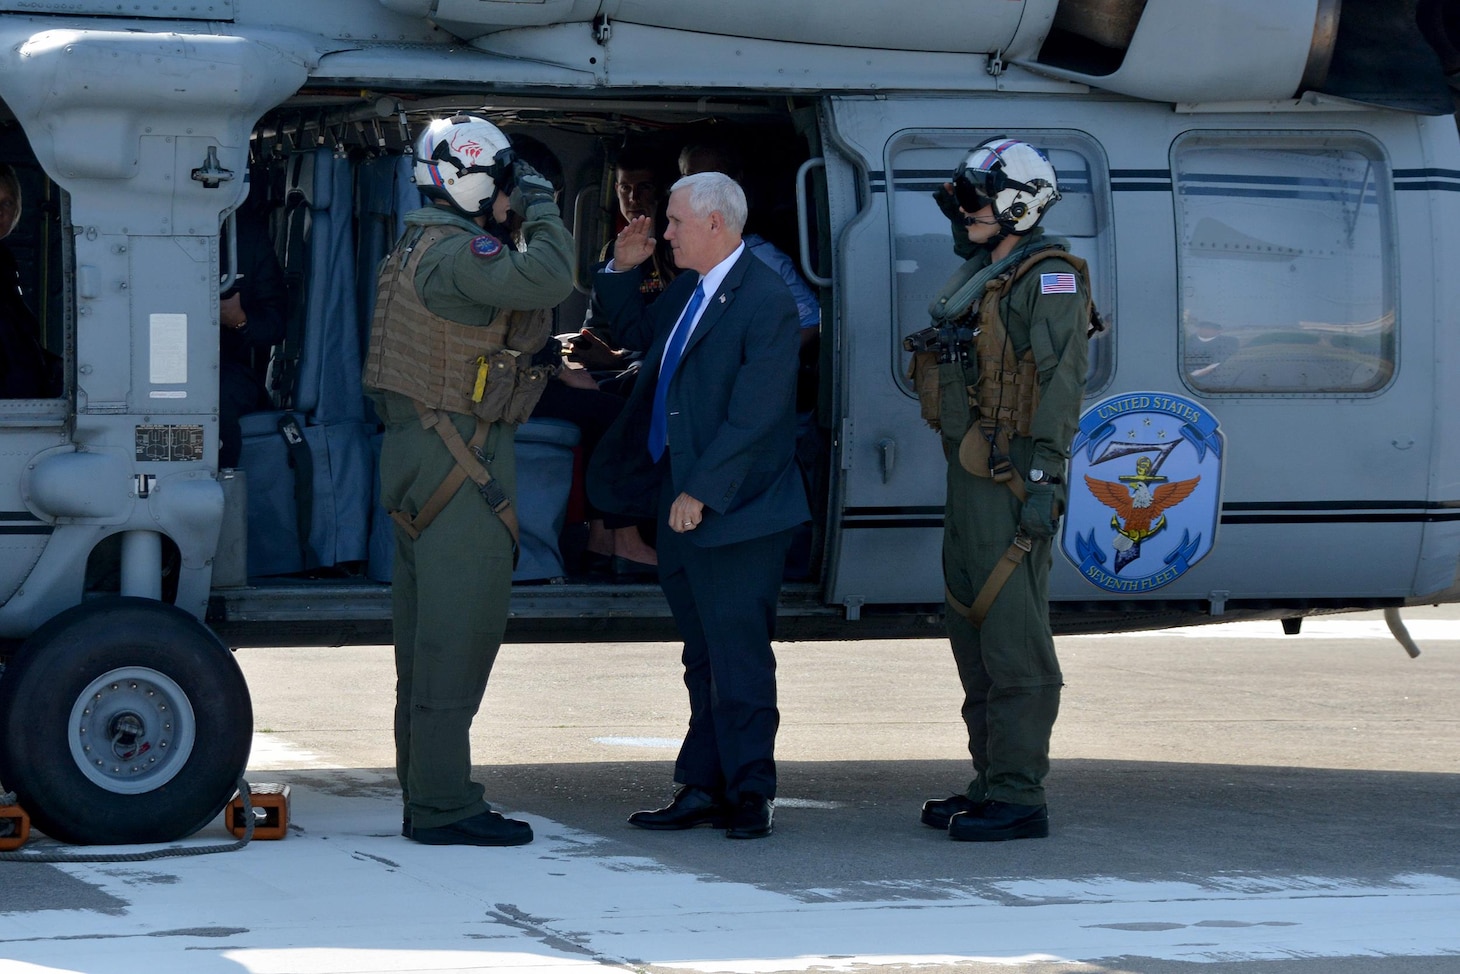 Vice President Mike Pence salutes the crew chief of Navy Two upon his arrival to Fleet Activities (FLEACT) Yokosuka. Pence's visit to Yokosuka Wednesday is part of official trip to the Asia-Pacific region reinforcing the United States' full commitment to its security alliances, April 19, 2017. During the Vice President's visit he spoke with military leaders and later with Sailors aboard USS RONALD REAGAN (CVN 76). Fleet Activities Yokosuka provides, maintains, and operates base facilities and services in support of 7th Fleet's forward-deployed naval forces, 71 tenant commands, and 26,000 military and civilian personnel.